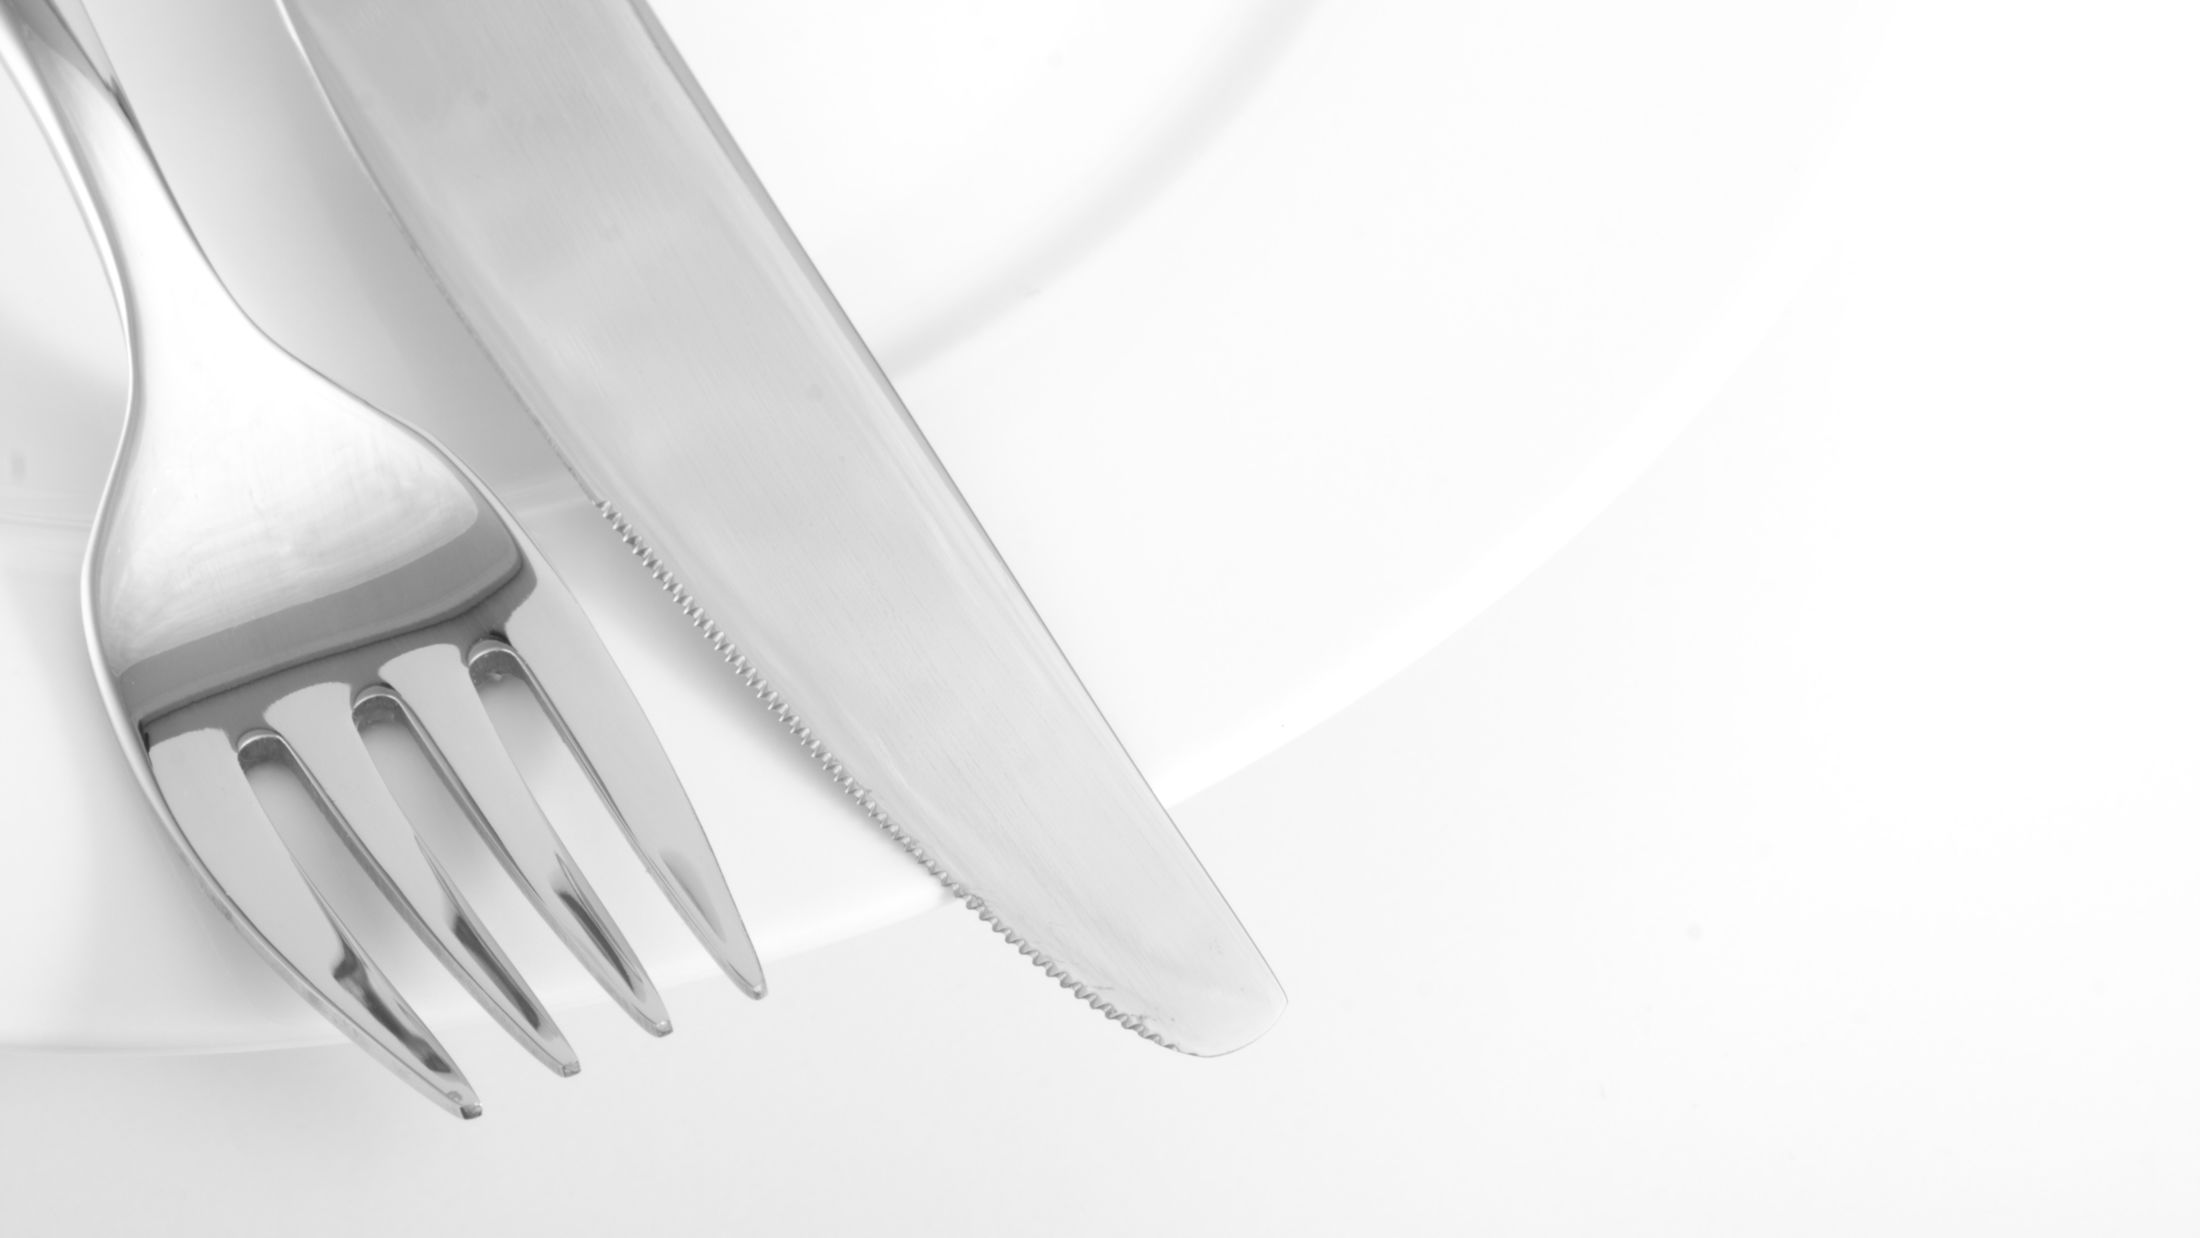 cutlery on a plate; Shutterstock ID 20269036; PO: Sovereign